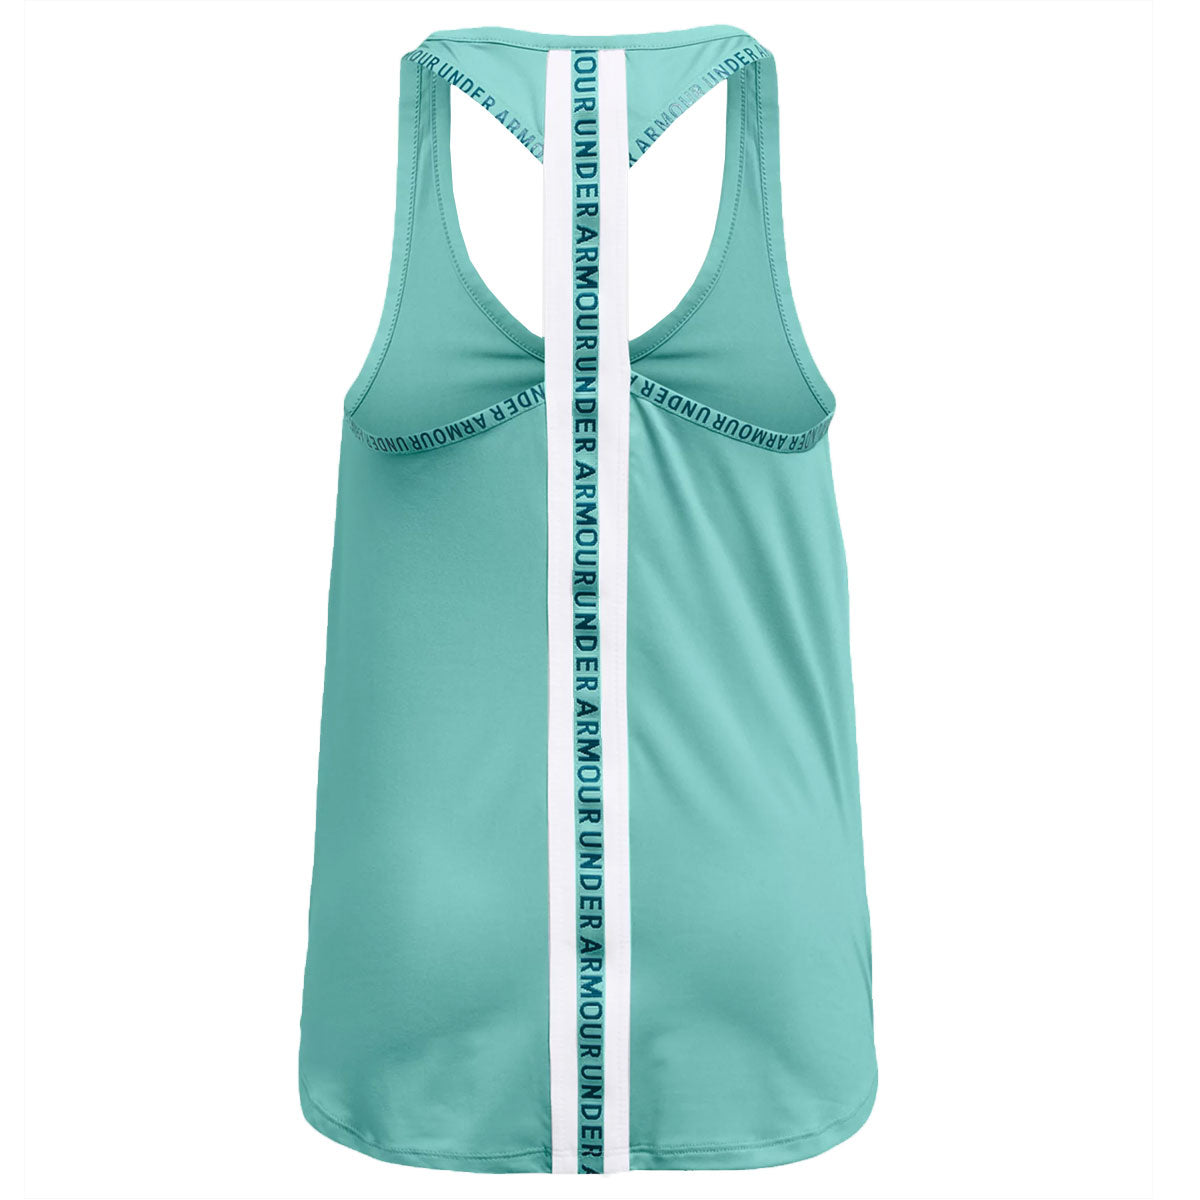 Under Armour Knockout Tank Top - Girls - Radial Turquoise/White